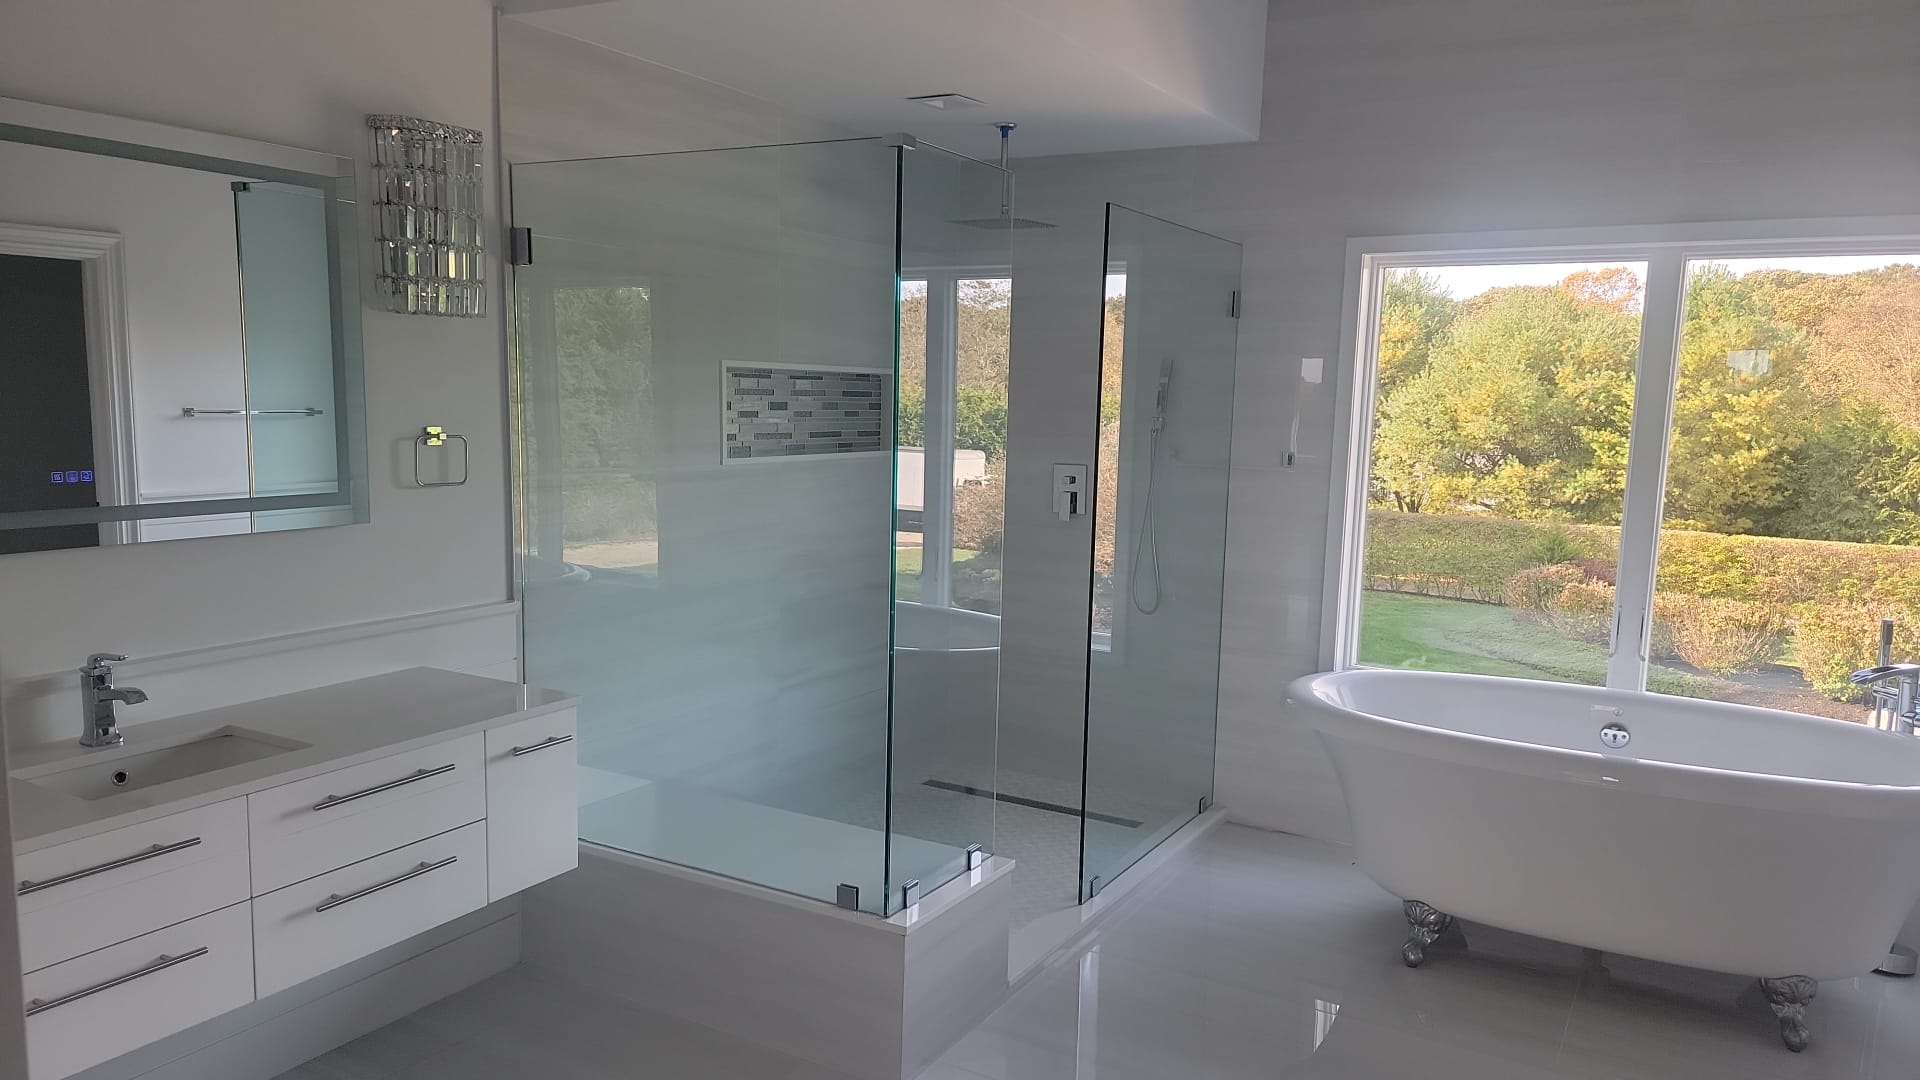 Bright and modern bathroom with rain shower head, glass shower enclosure, glossy white tiling and backsplash, matte white modern cabinetry and white cast iron tub in front of large bay windows overlooking scenic foliage